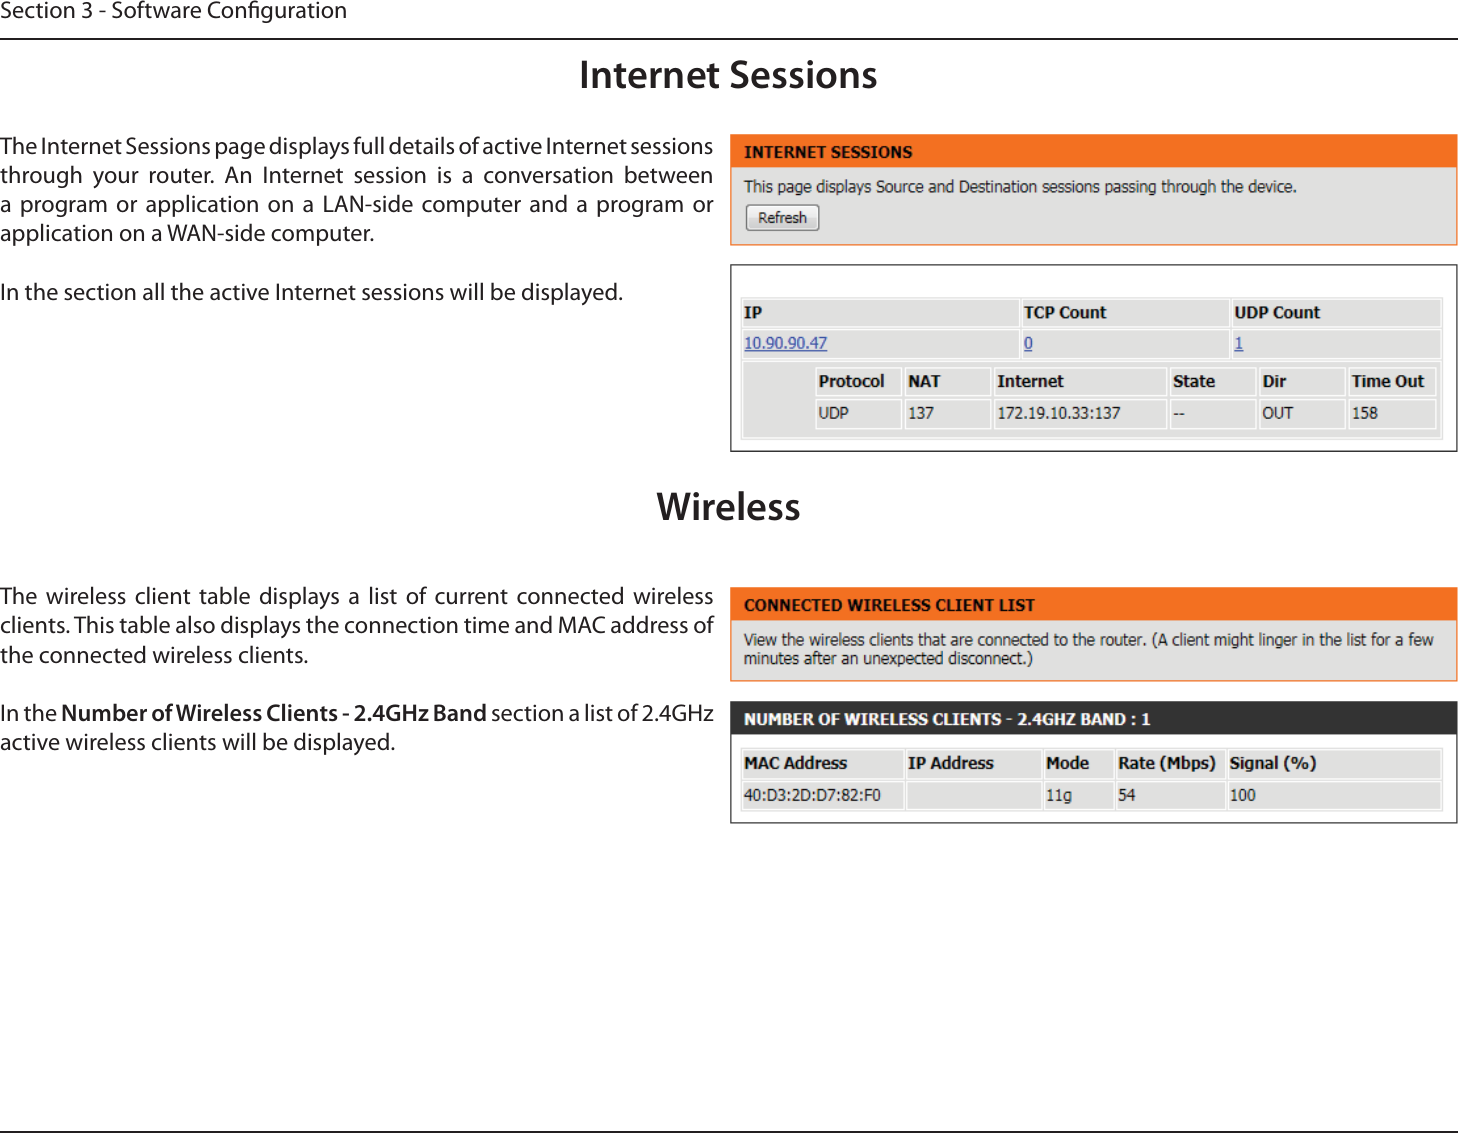 Section 3 - Software CongurationInternet SessionsThe Internet Sessions page displays full details of active Internet sessions through your router. An Internet session is a conversation between a program or application on a LAN-side computer and a program or application on a WAN-side computer.In the section all the active Internet sessions will be displayed.WirelessThe wireless client table displays a list of current connected wireless clients. This table also displays the connection time and MAC address of the connected wireless clients.In the Number of Wireless Clients - 2.4GHz Band section a list of 2.4GHz active wireless clients will be displayed.